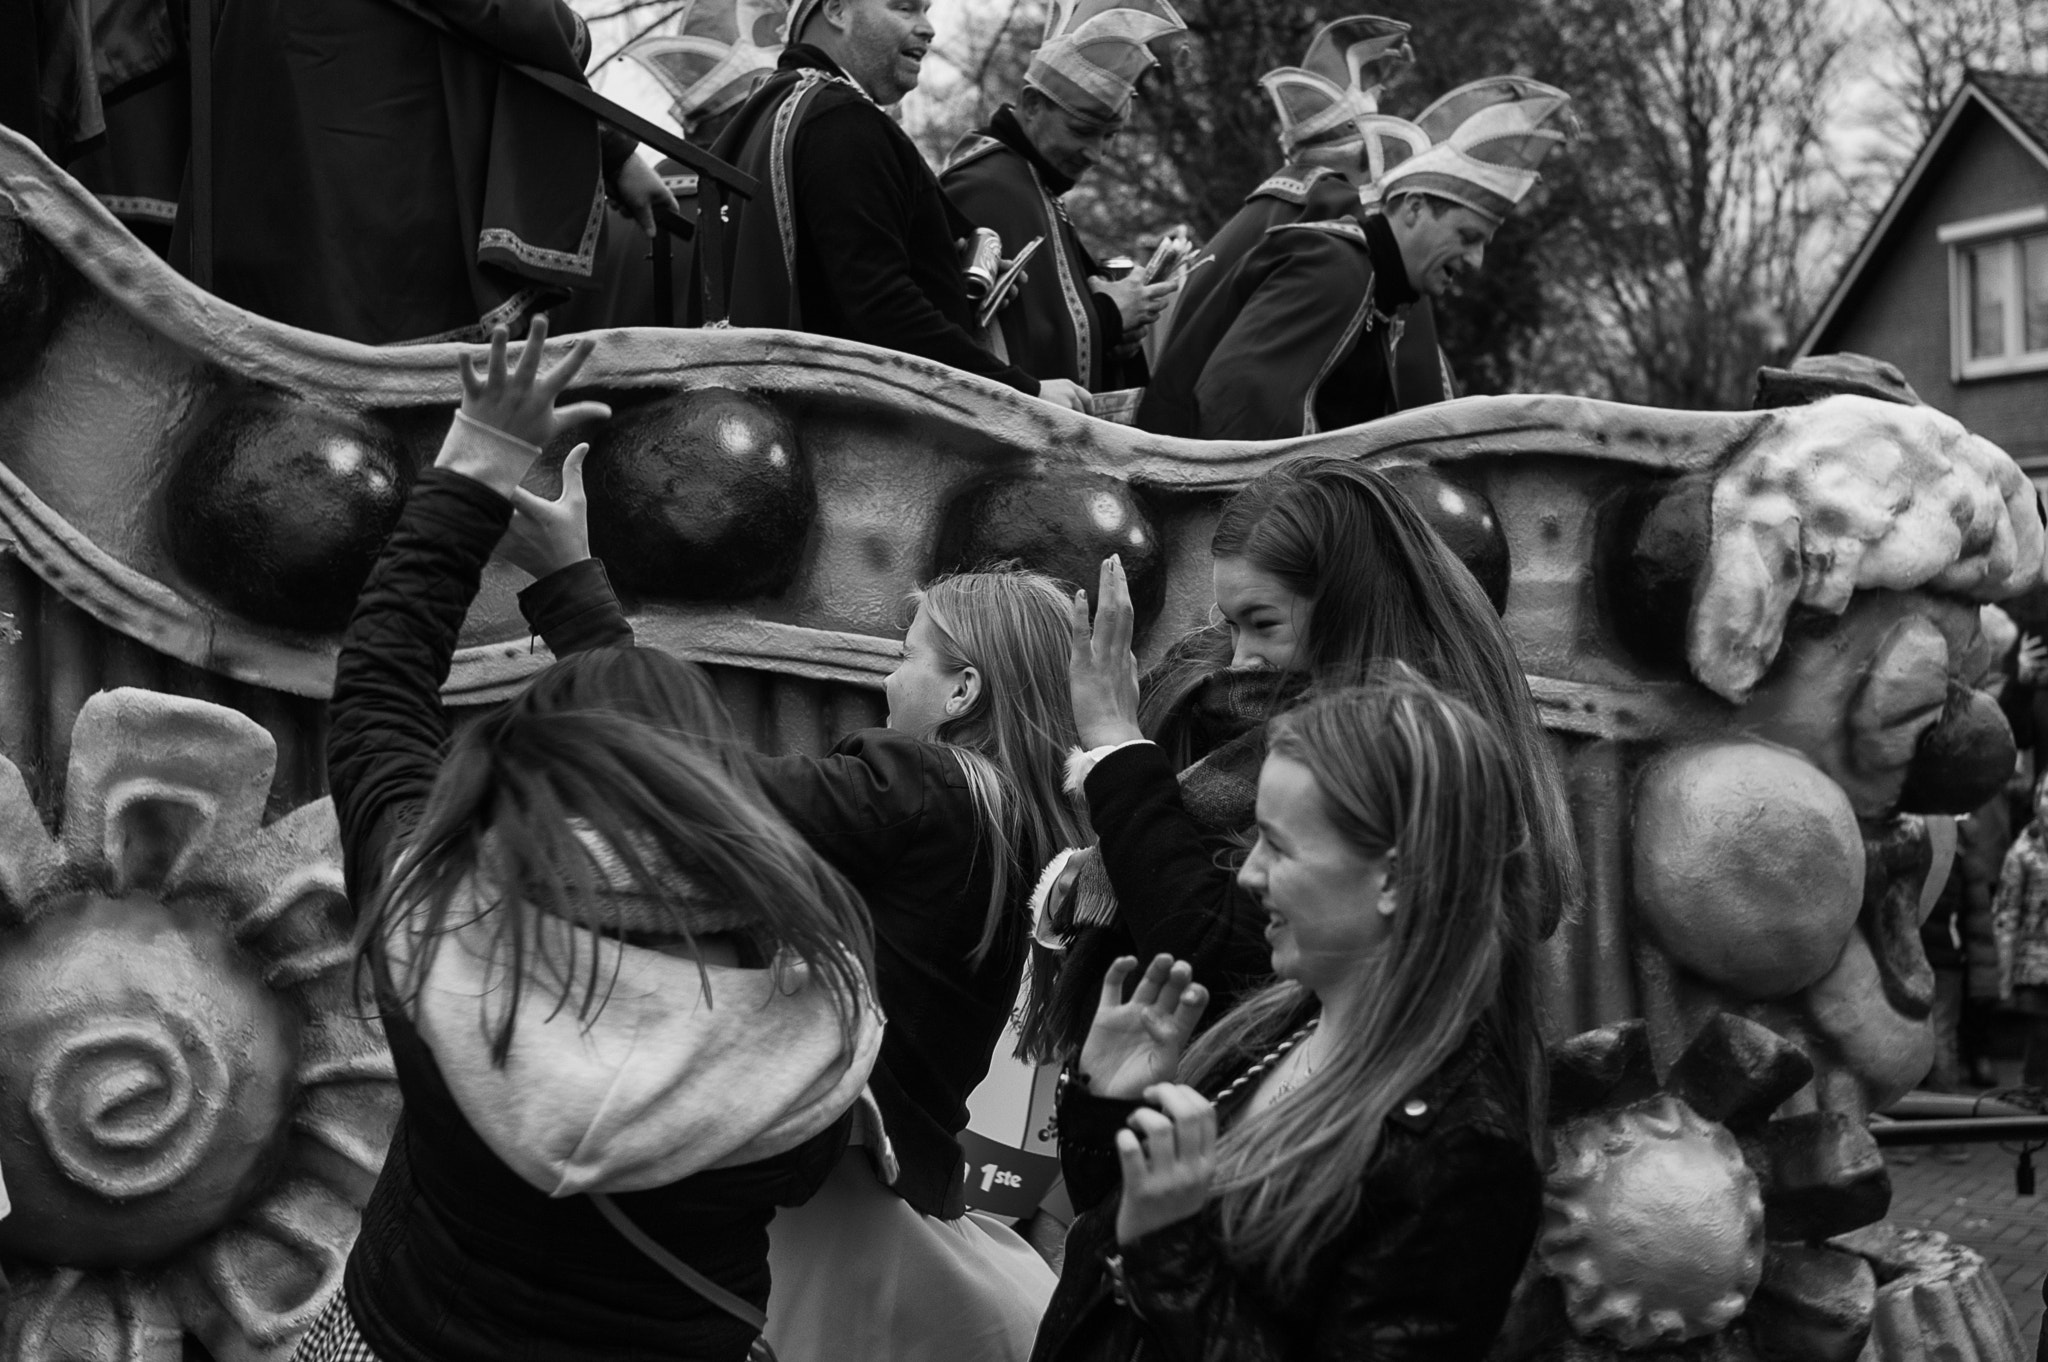 Leica M8 sample photo. Carnaval in braamt, the netherlands photography